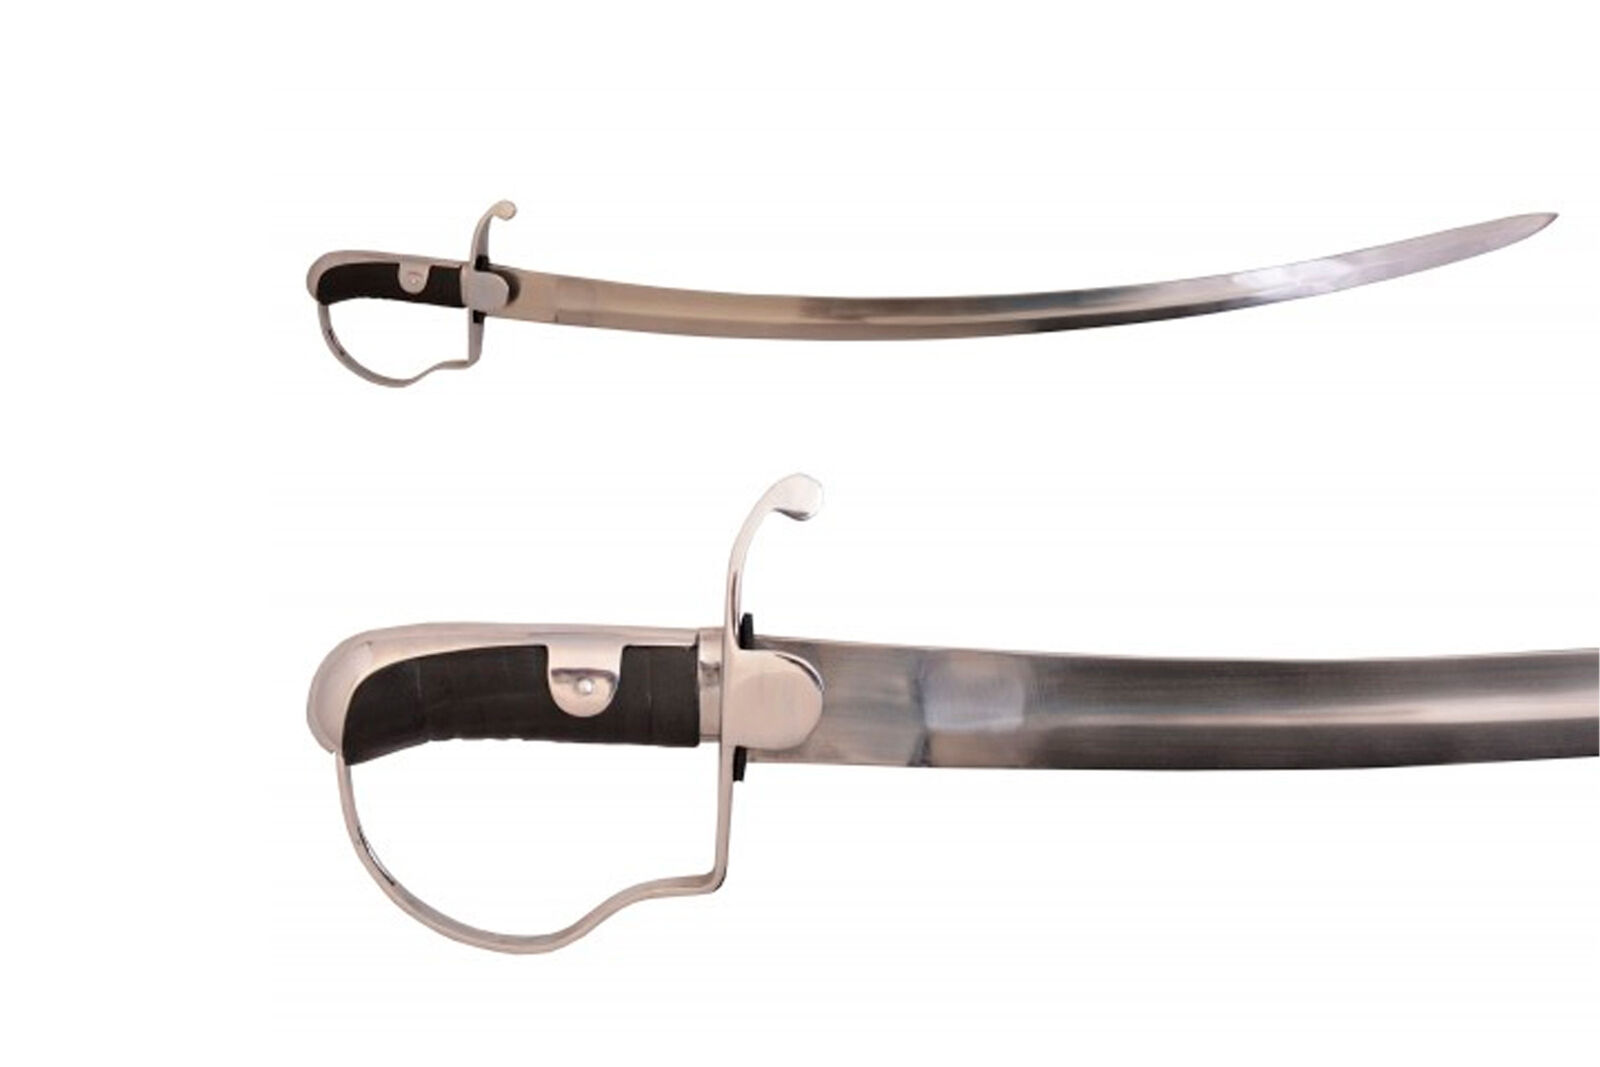 Prussian cavalry sabre, patron M 1811, called Sable Blocher